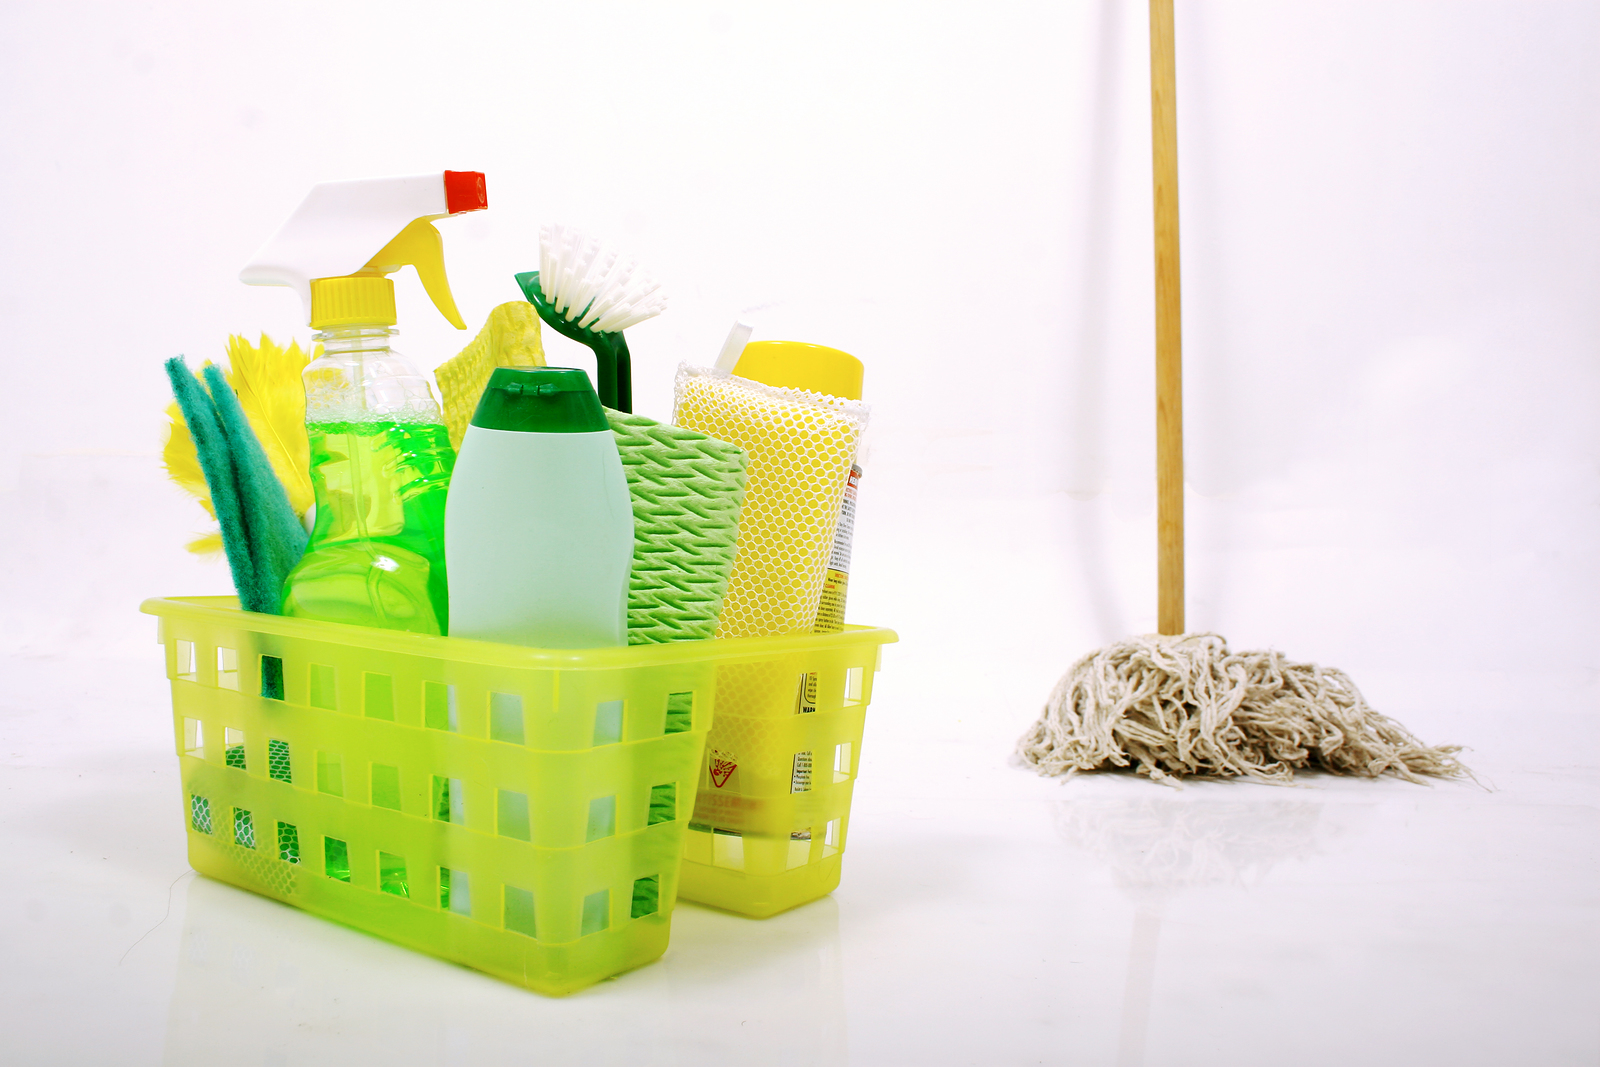 Whole House Cleaning | It Sparkles. It Shines. It's Clean
